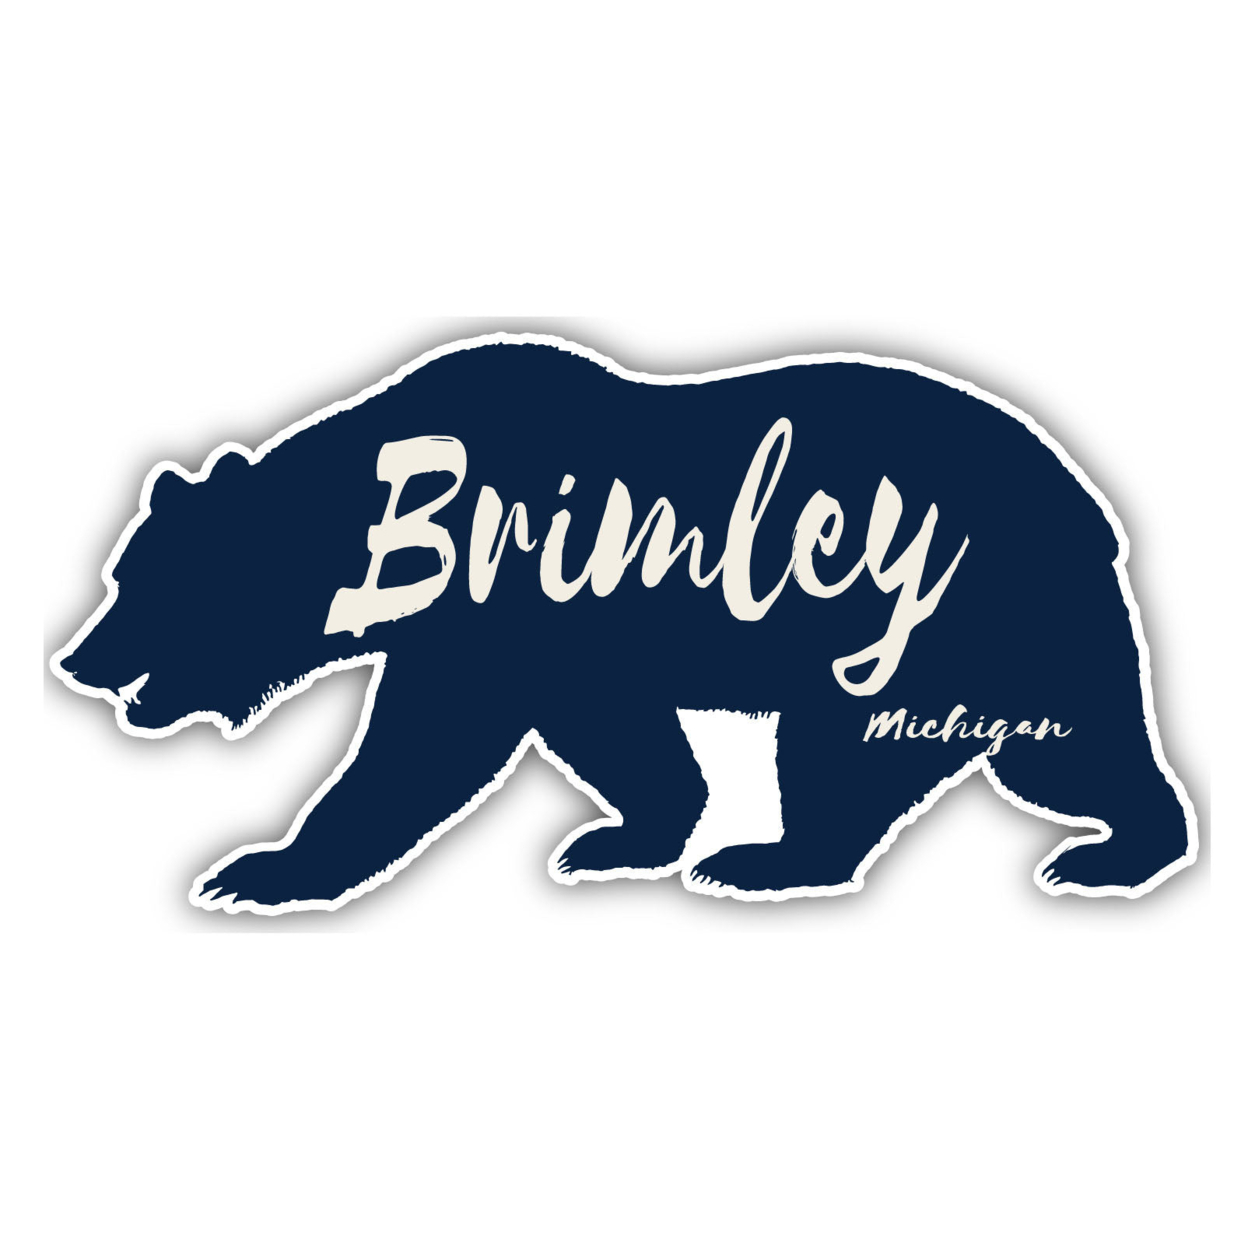 Brimley Michigan Souvenir Decorative Stickers (Choose Theme And Size) - Single Unit, 2-Inch, Great Outdoors